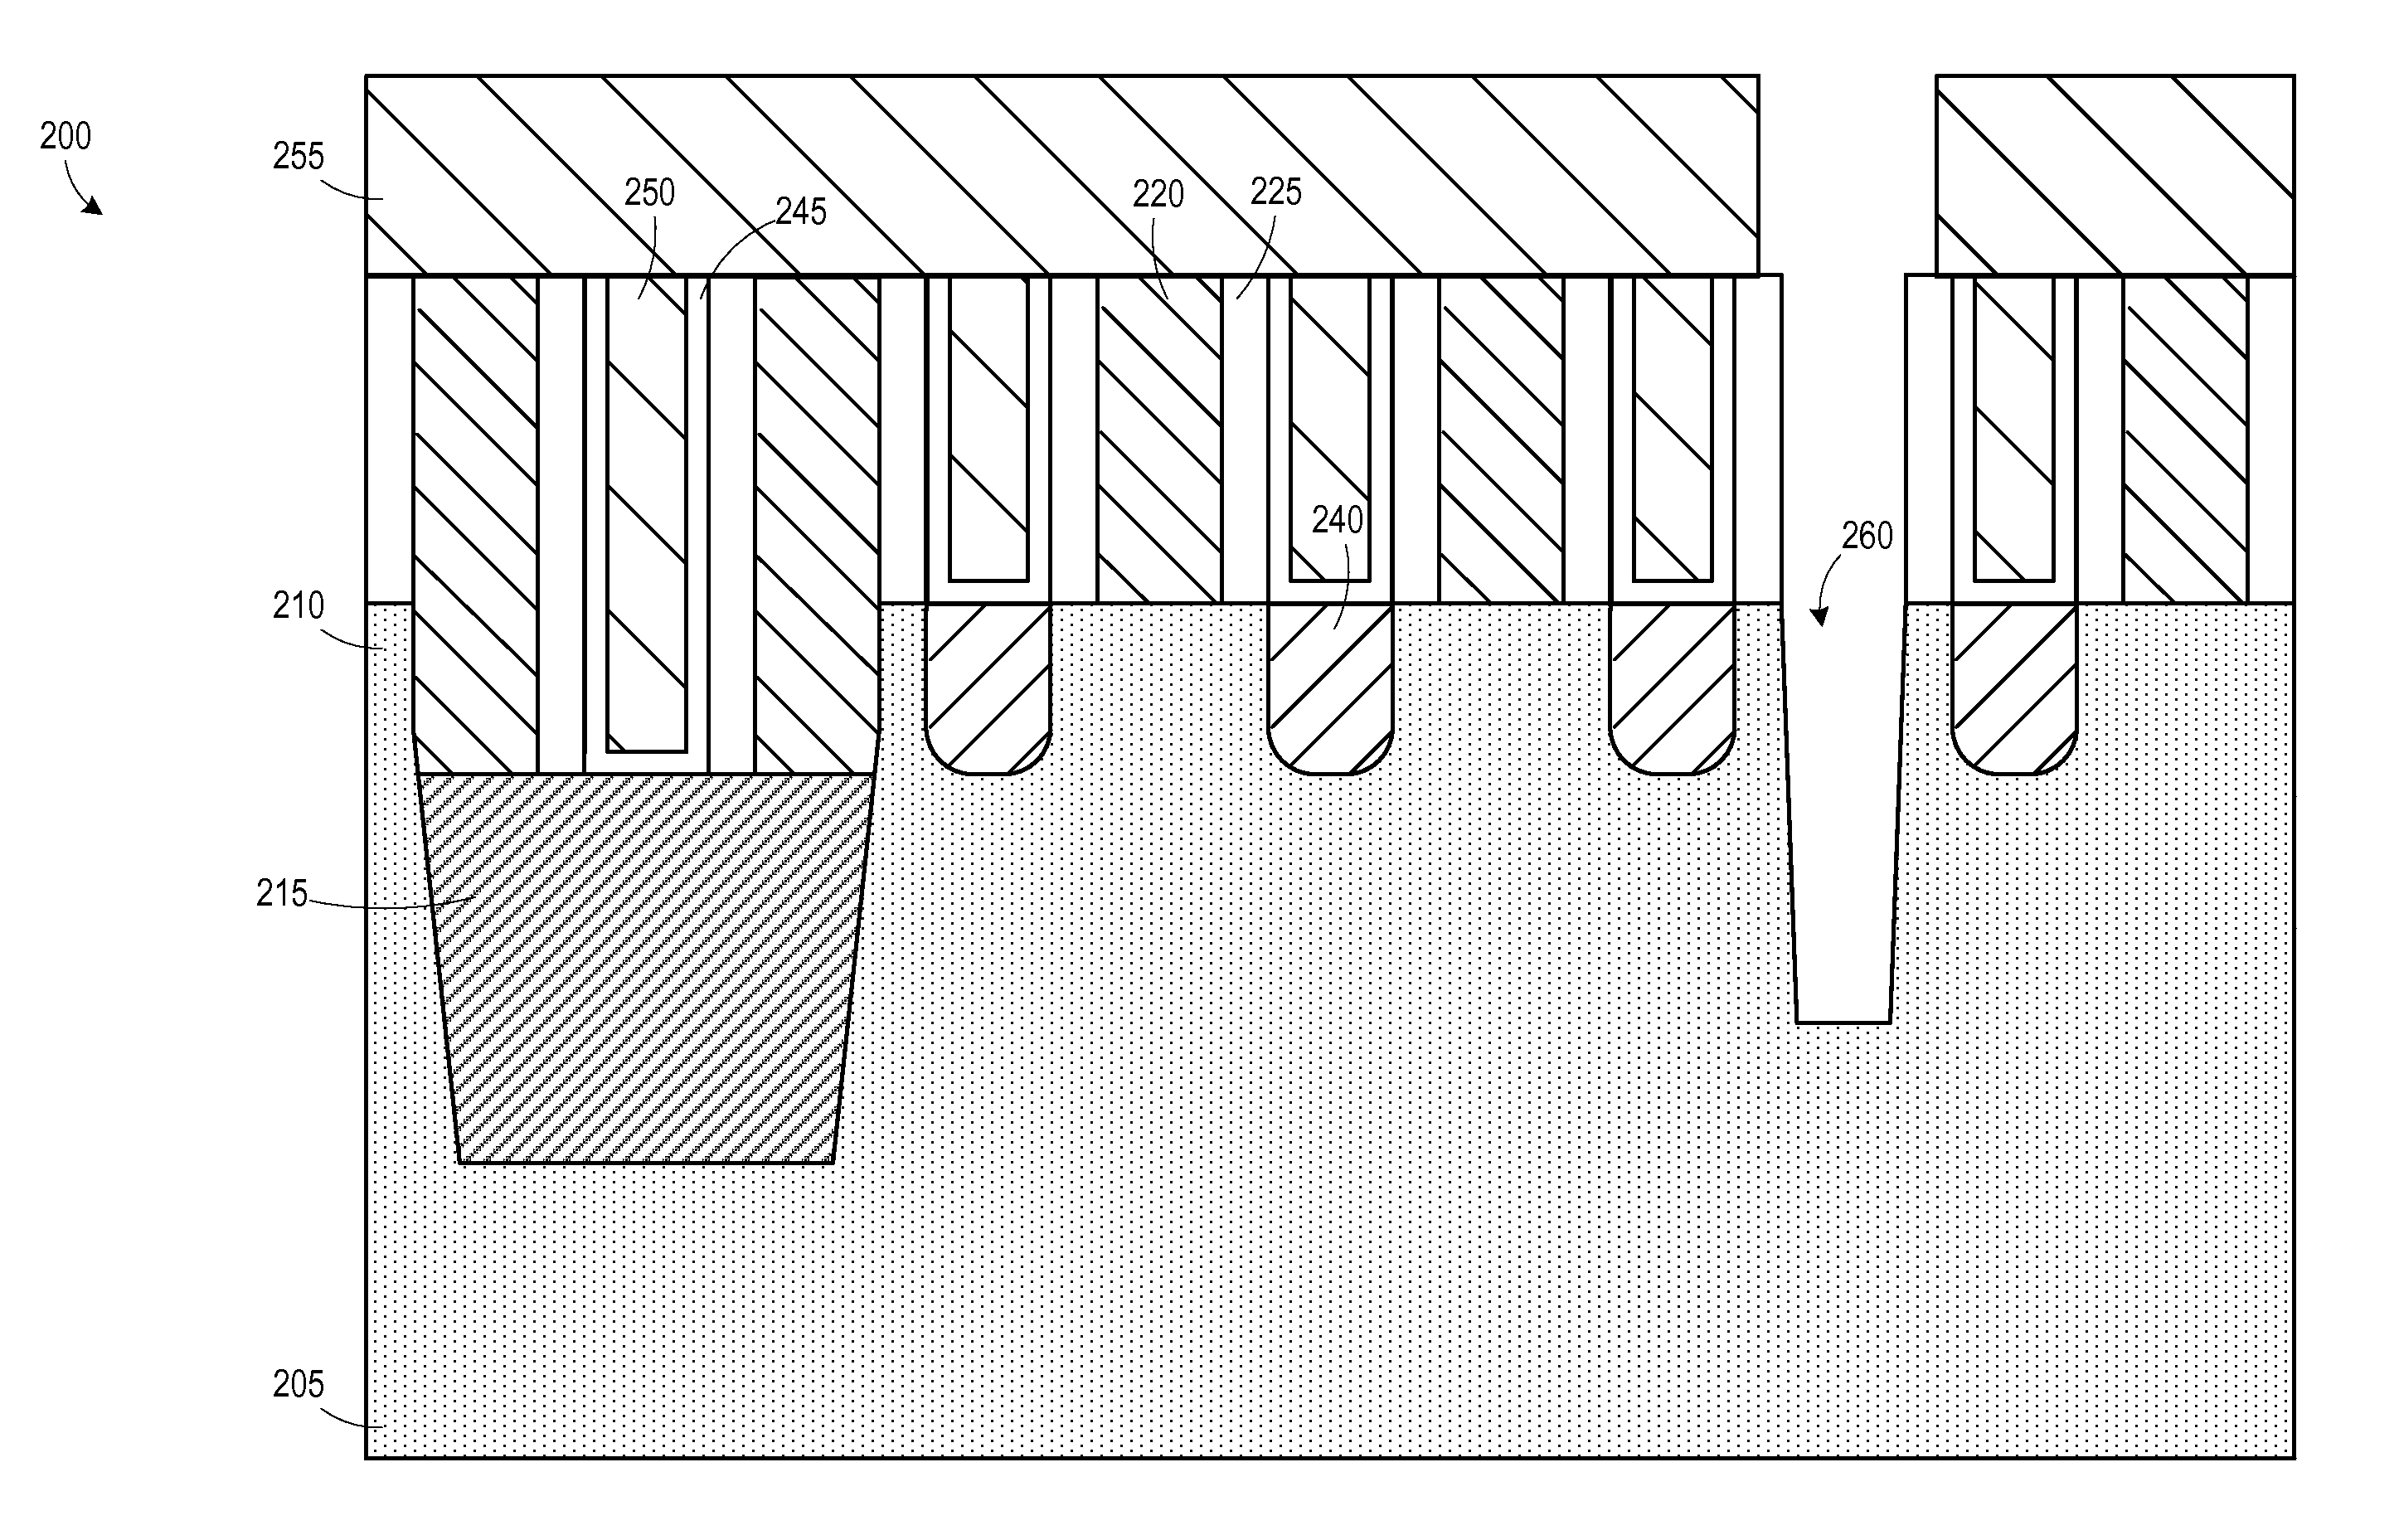 Method for forming single diffusion breaks between finFET devices and the resulting devices